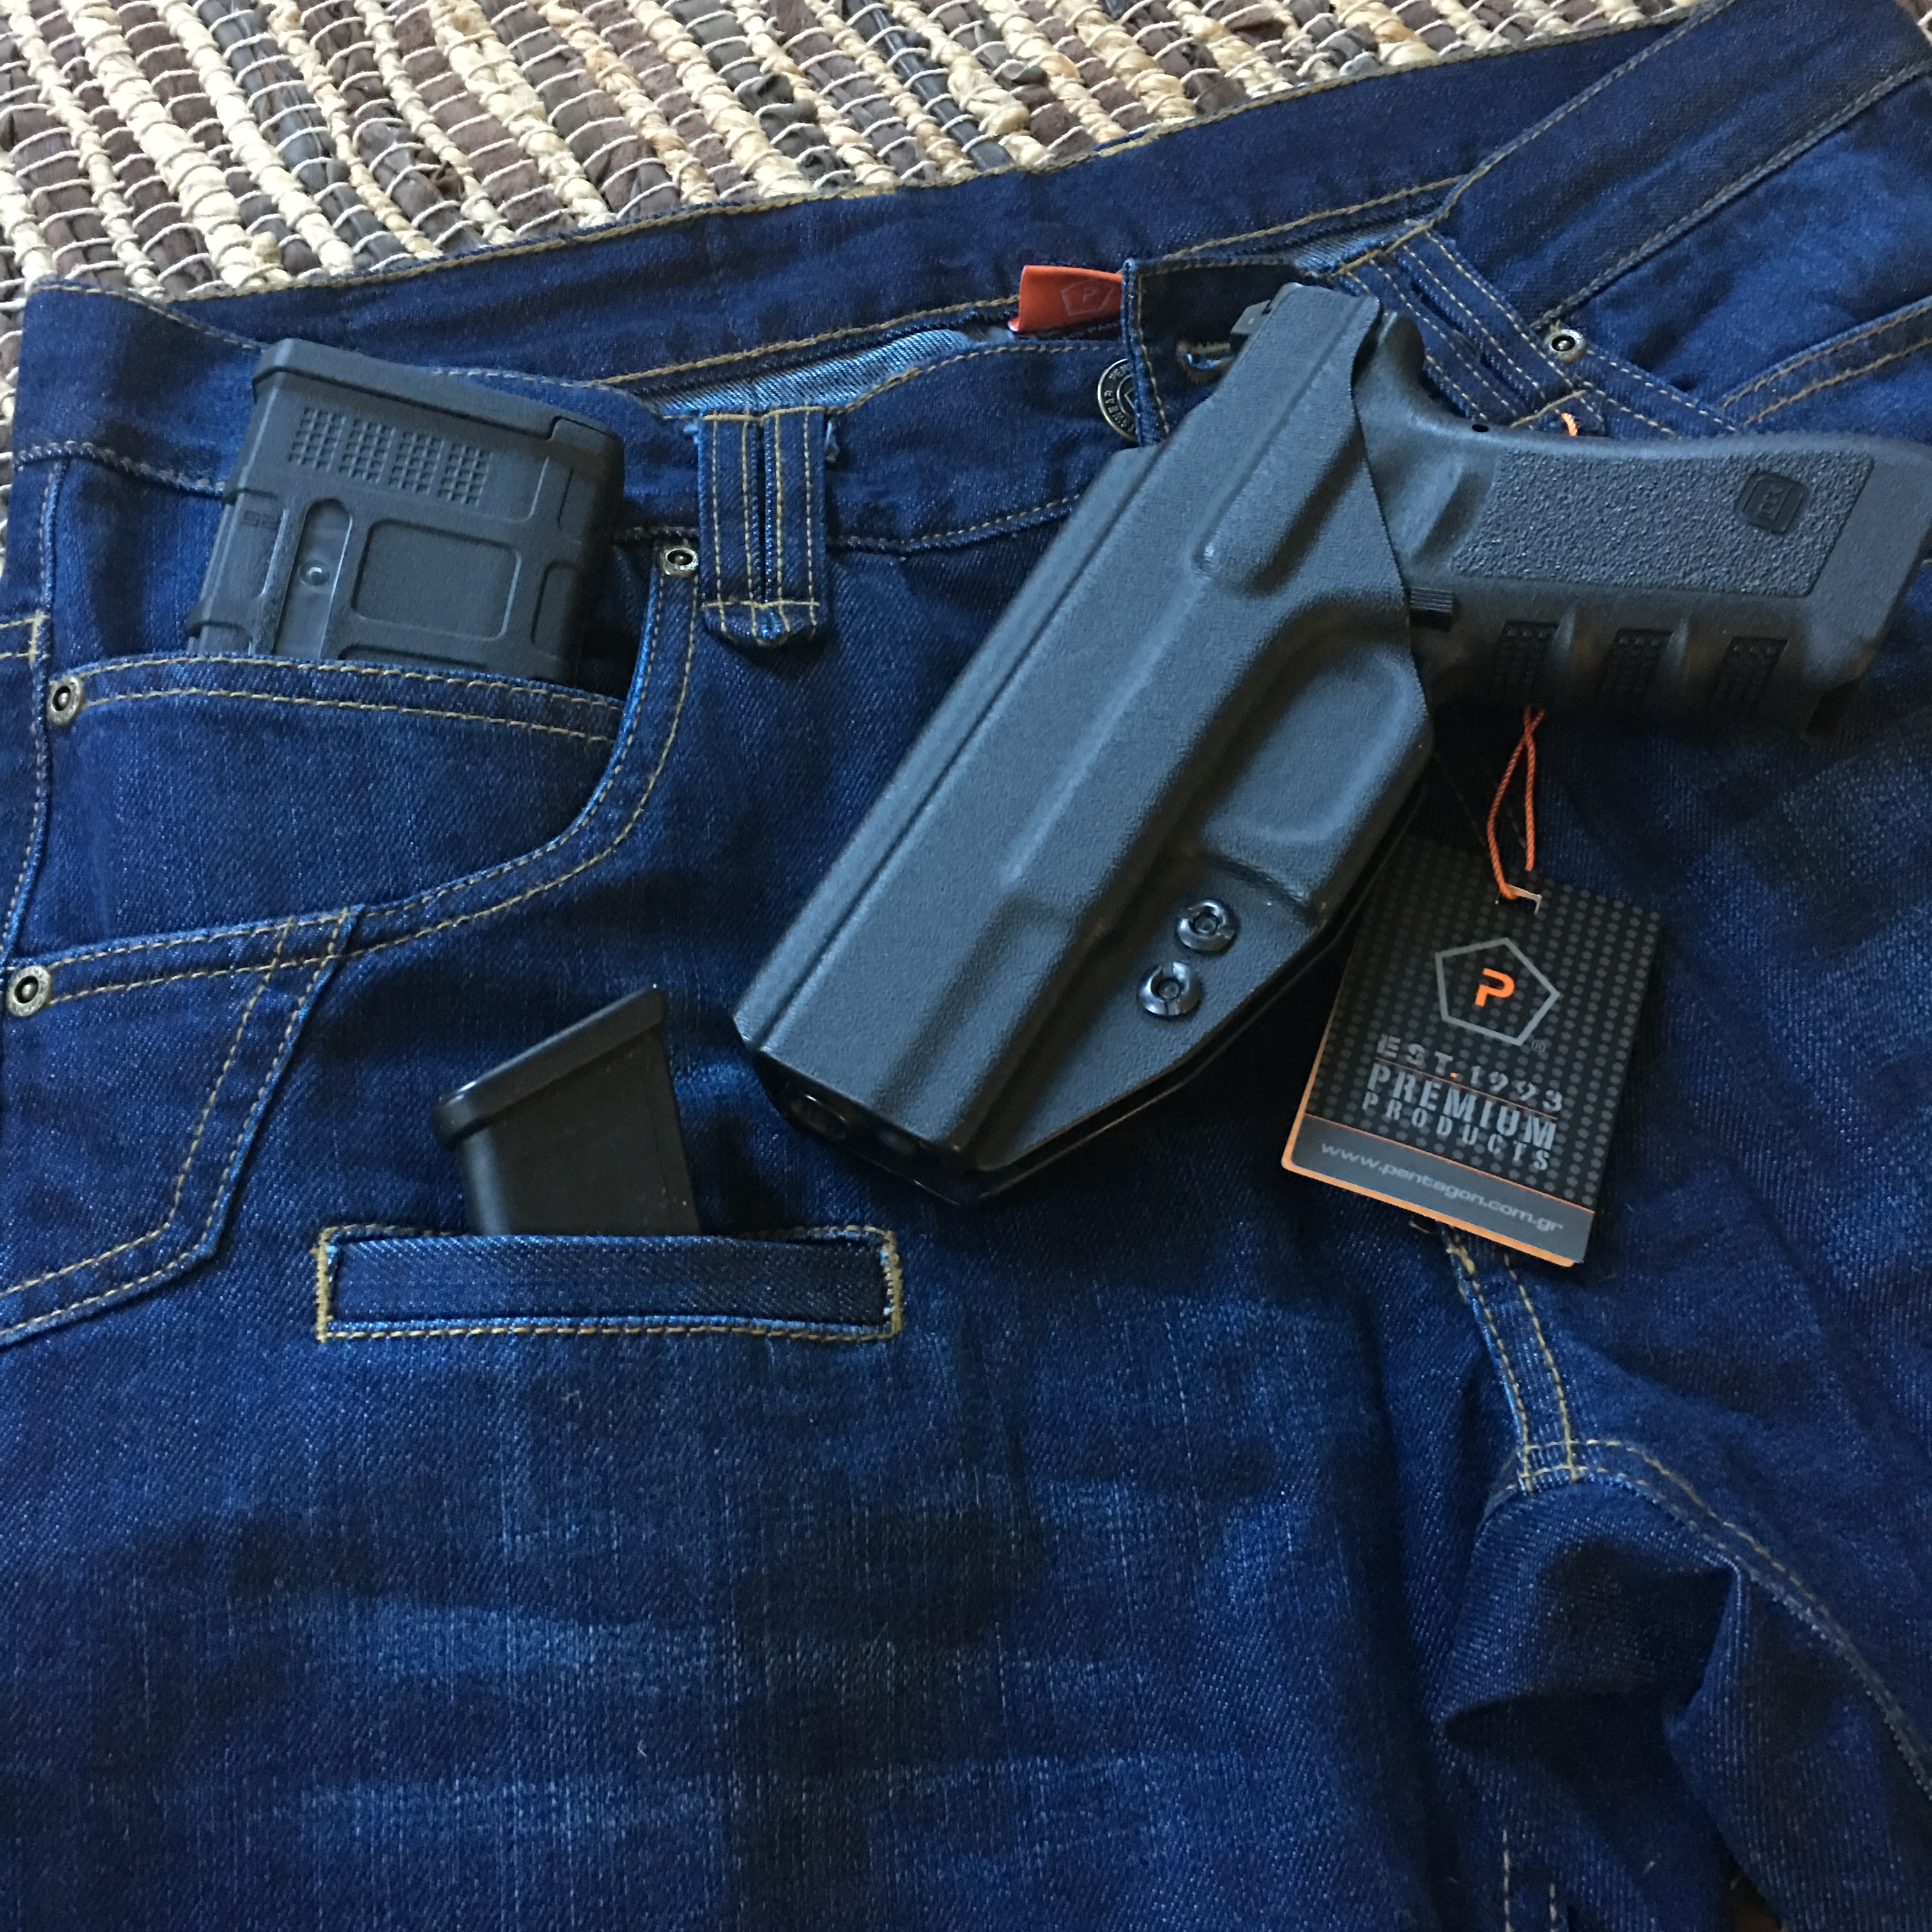 tactical jeans